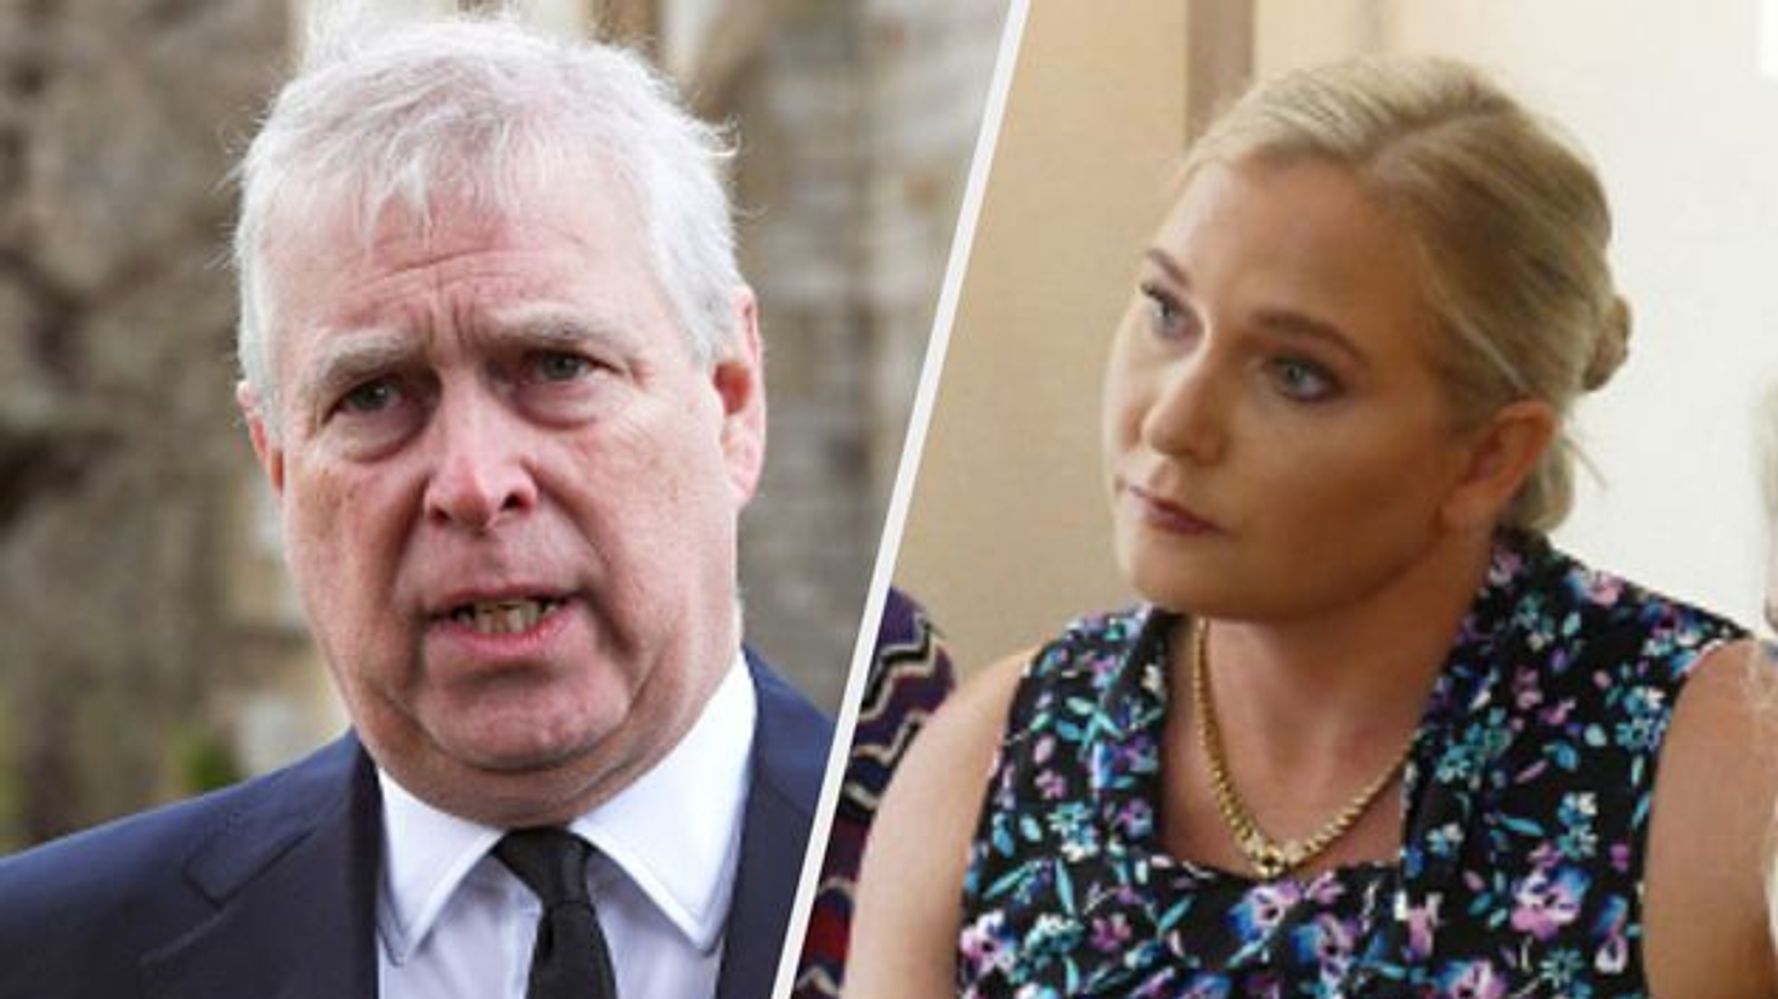 Prince Andrew Lawsuit: Why Virginia Giuffre Is Suing The Duke Of York